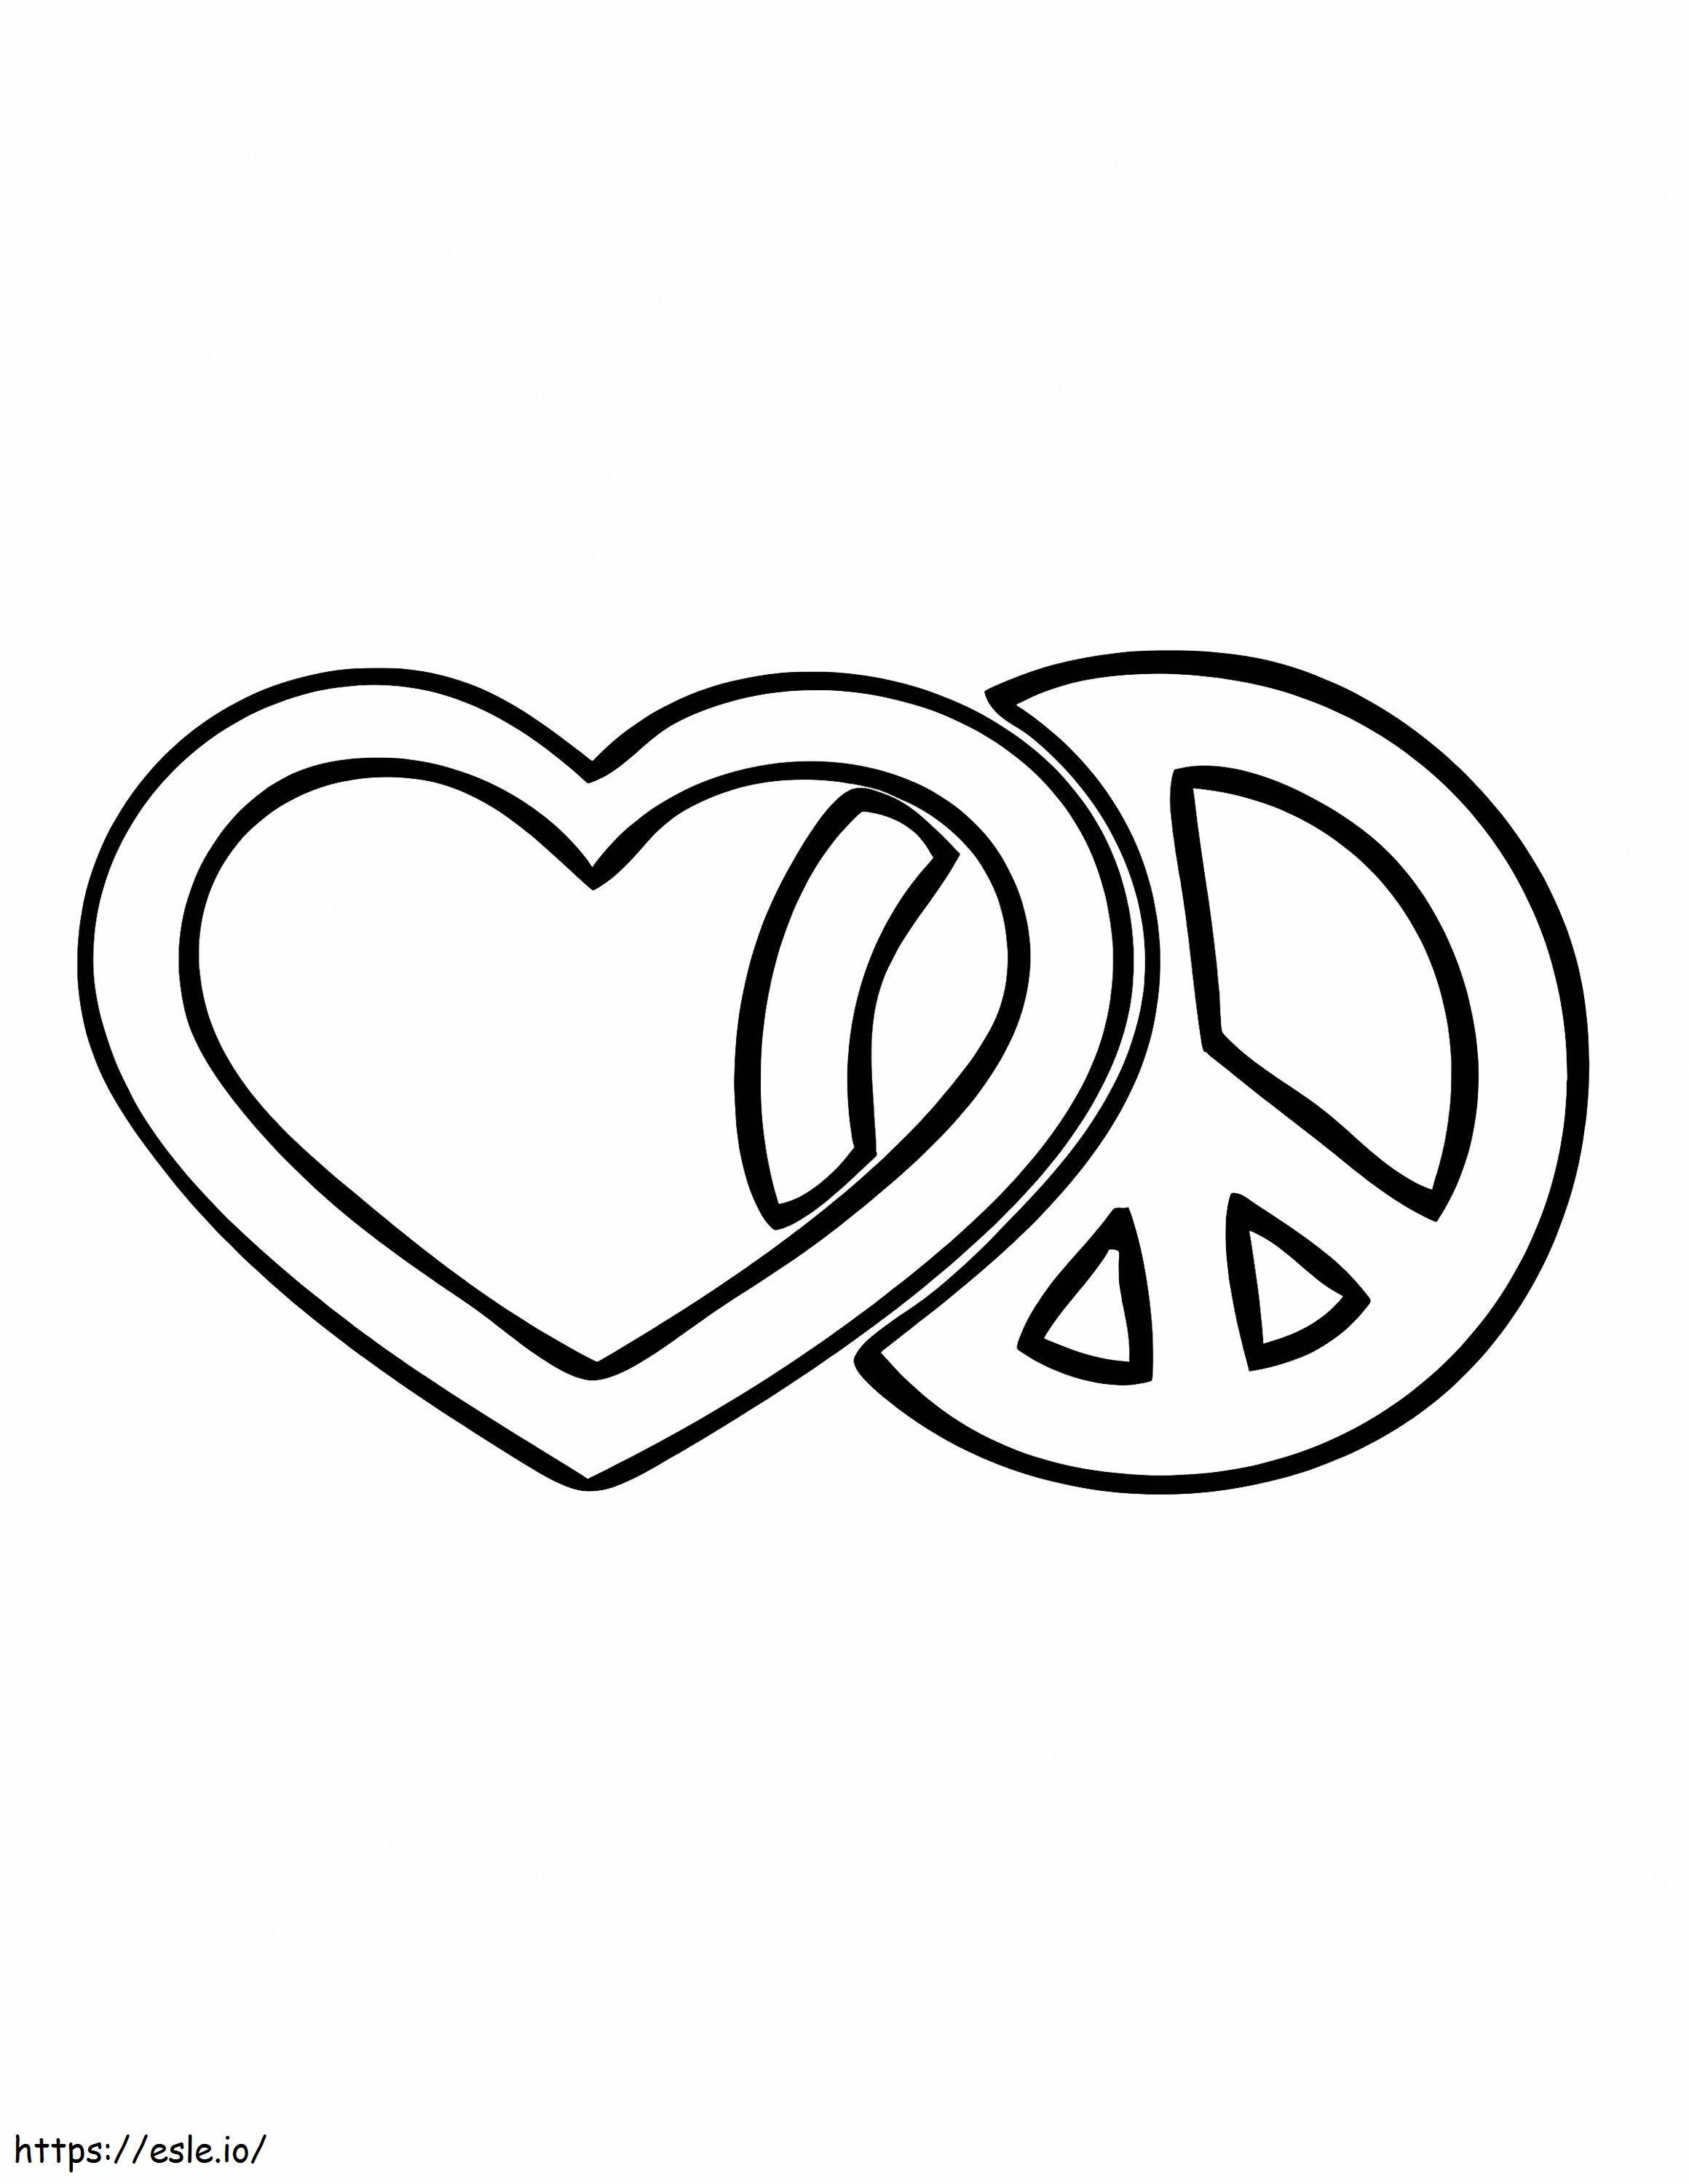 Love Peace coloring page